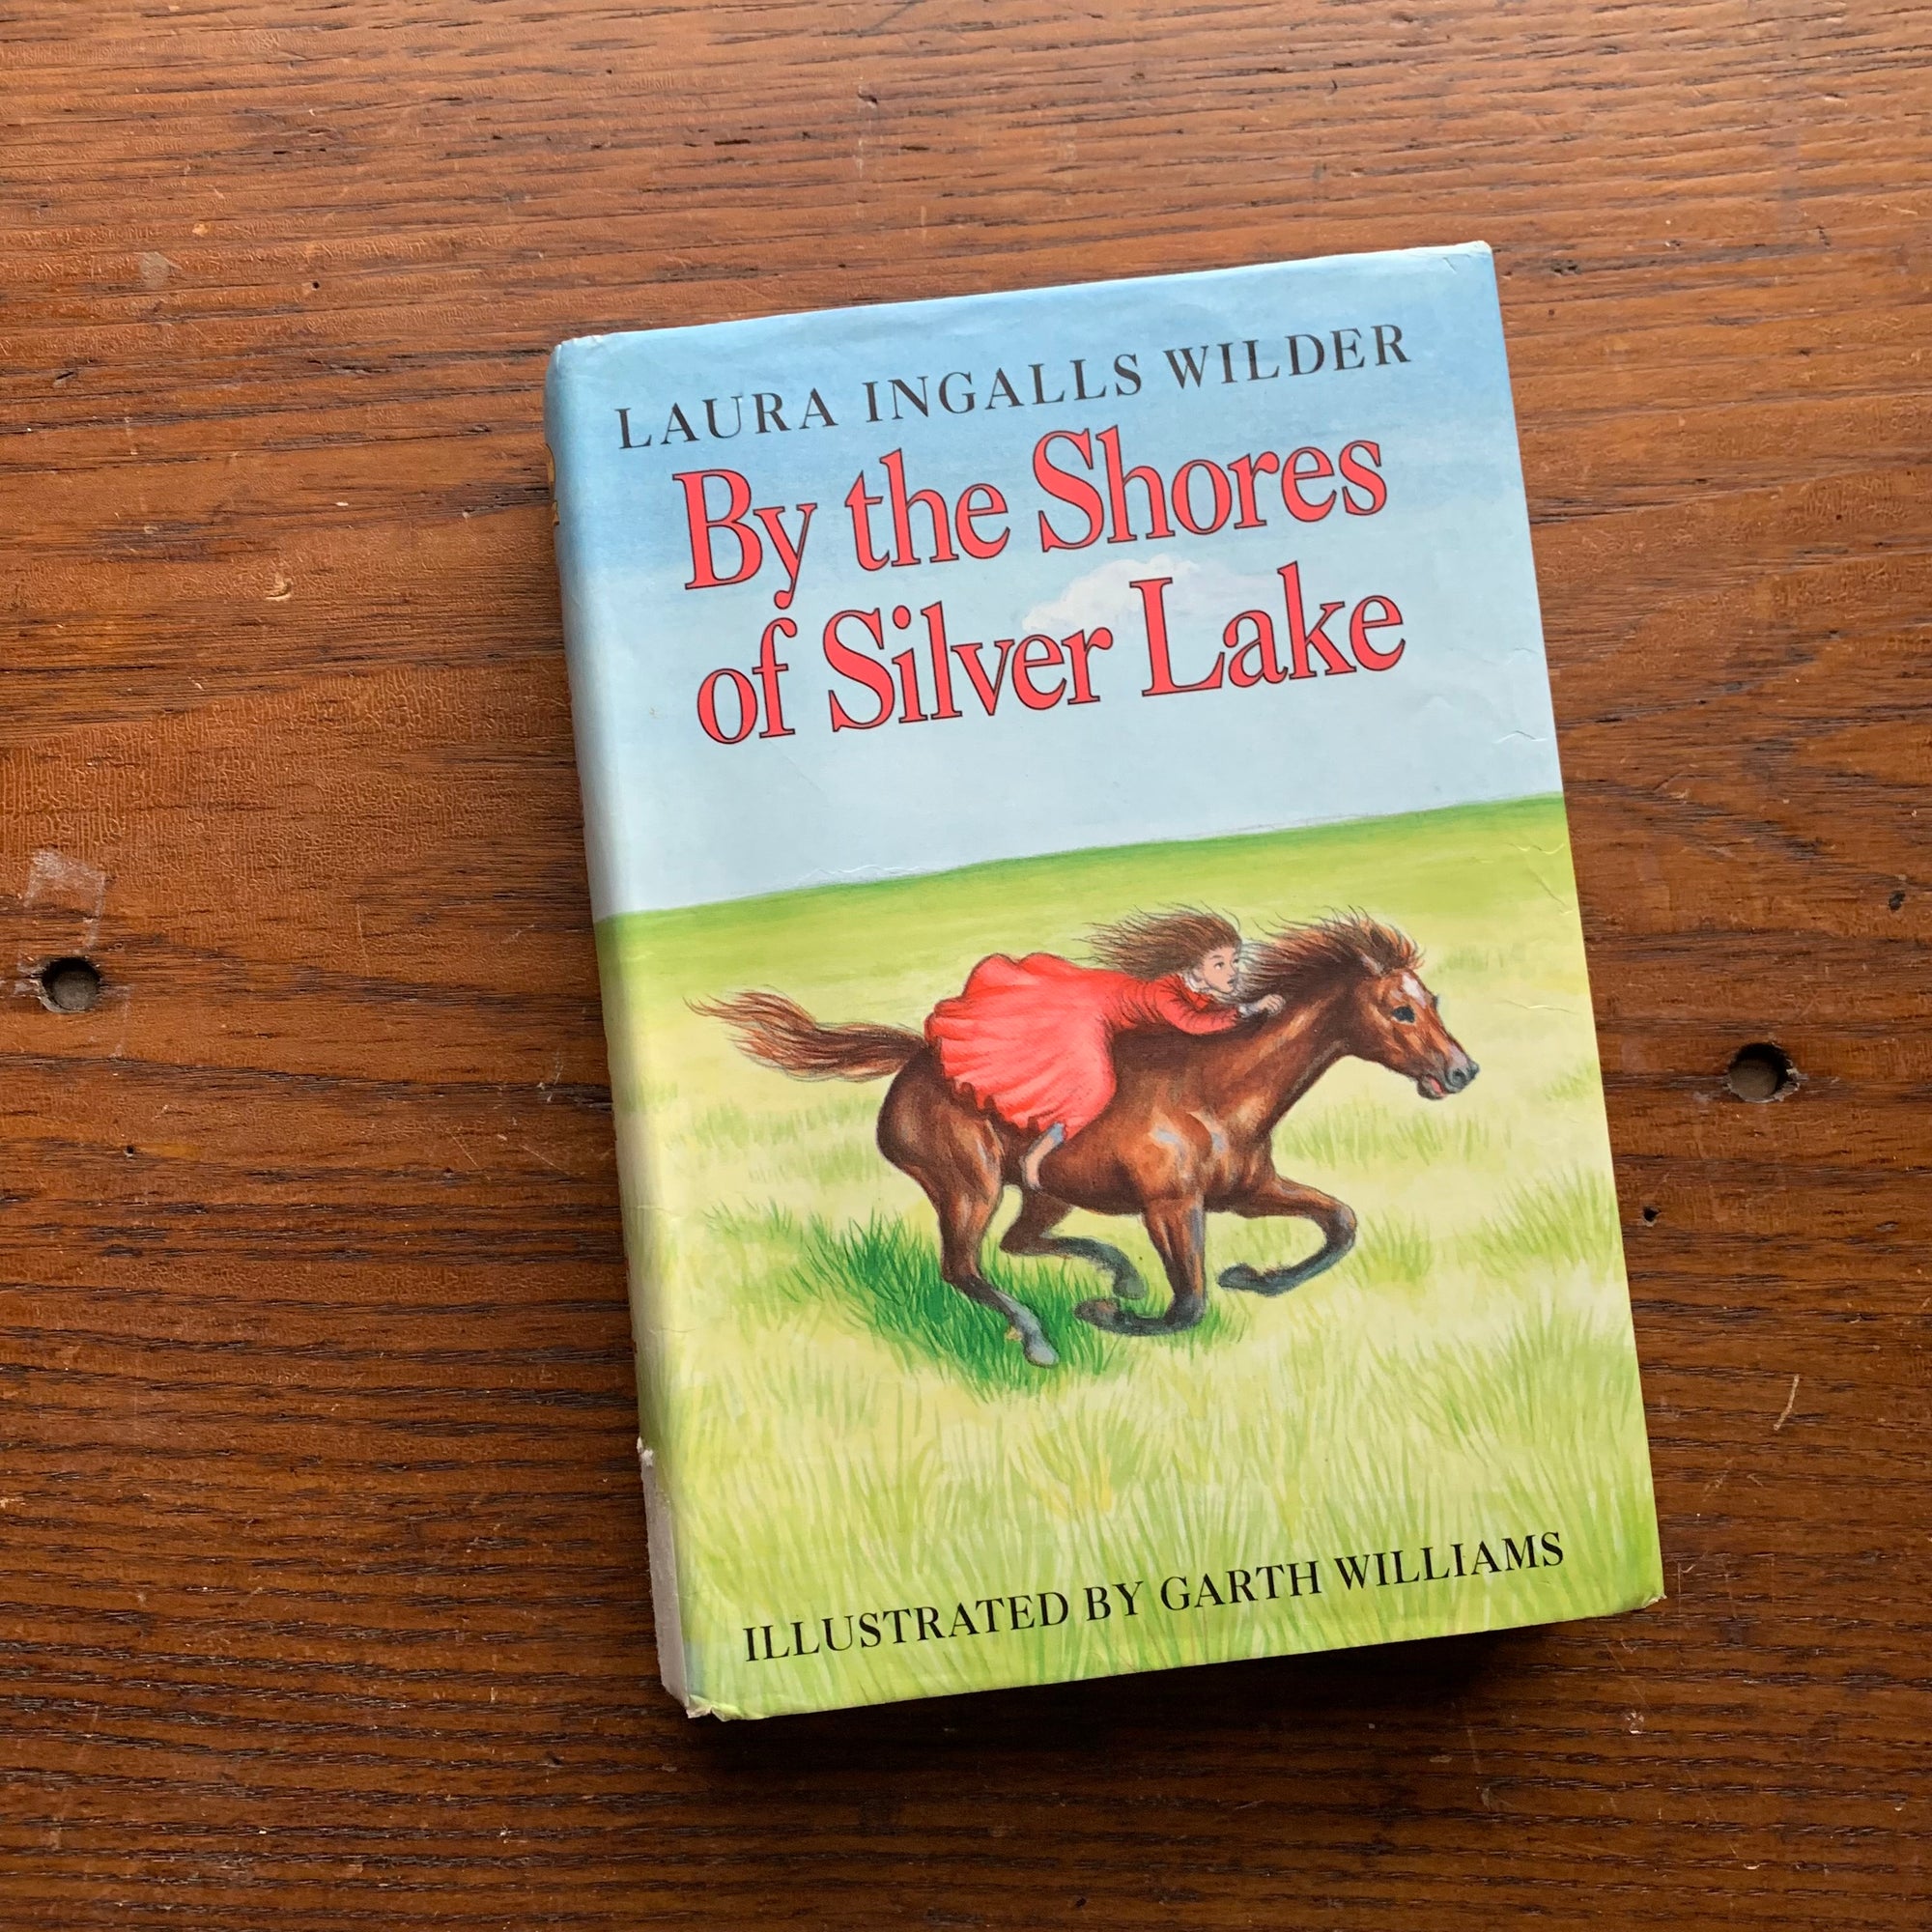 Log Cabin Vintage – vintage children’s book, children’s book, chapter book, Little House on the Prairie Series – By the Shores of Silver Lake by Laura Ingalls Wilder with Illustrations by Garth Williams - view of the dust jacket's front cover